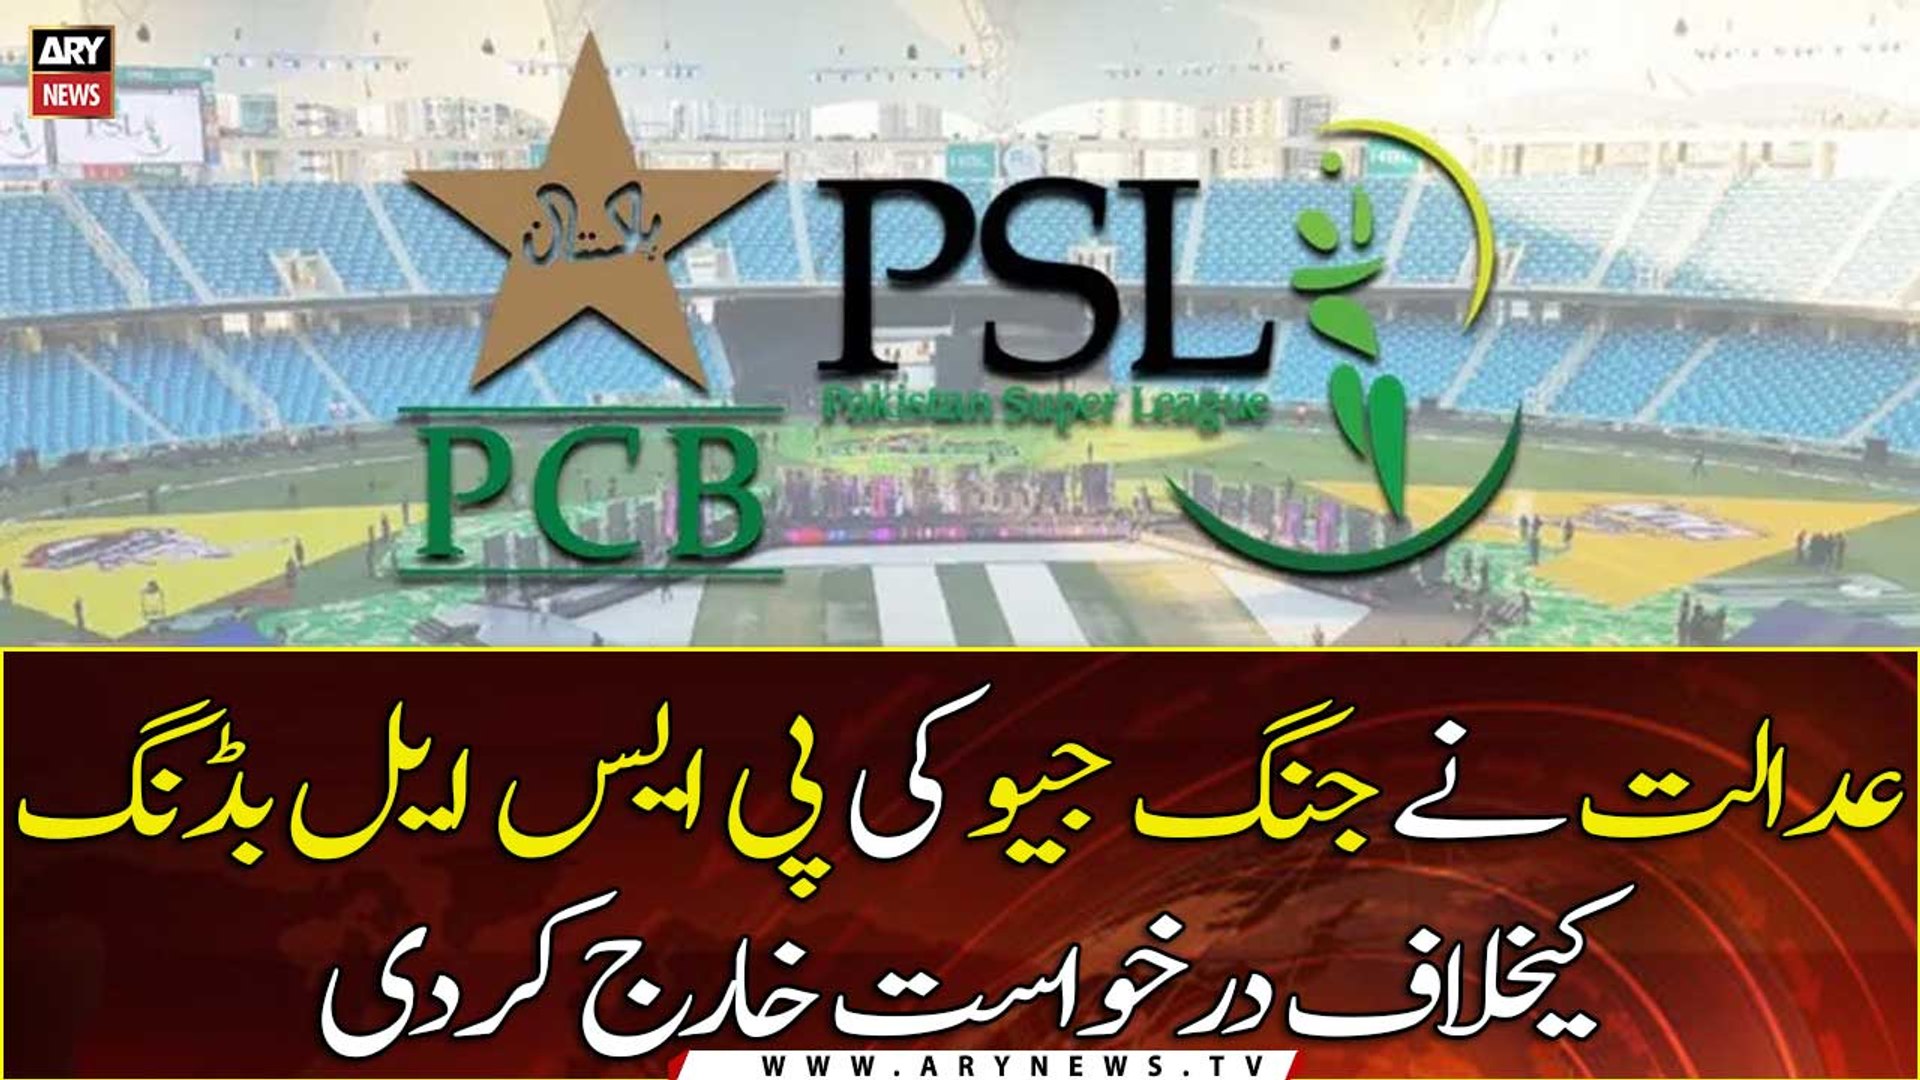 Court dismissed Geos petition against PSL rights bidding